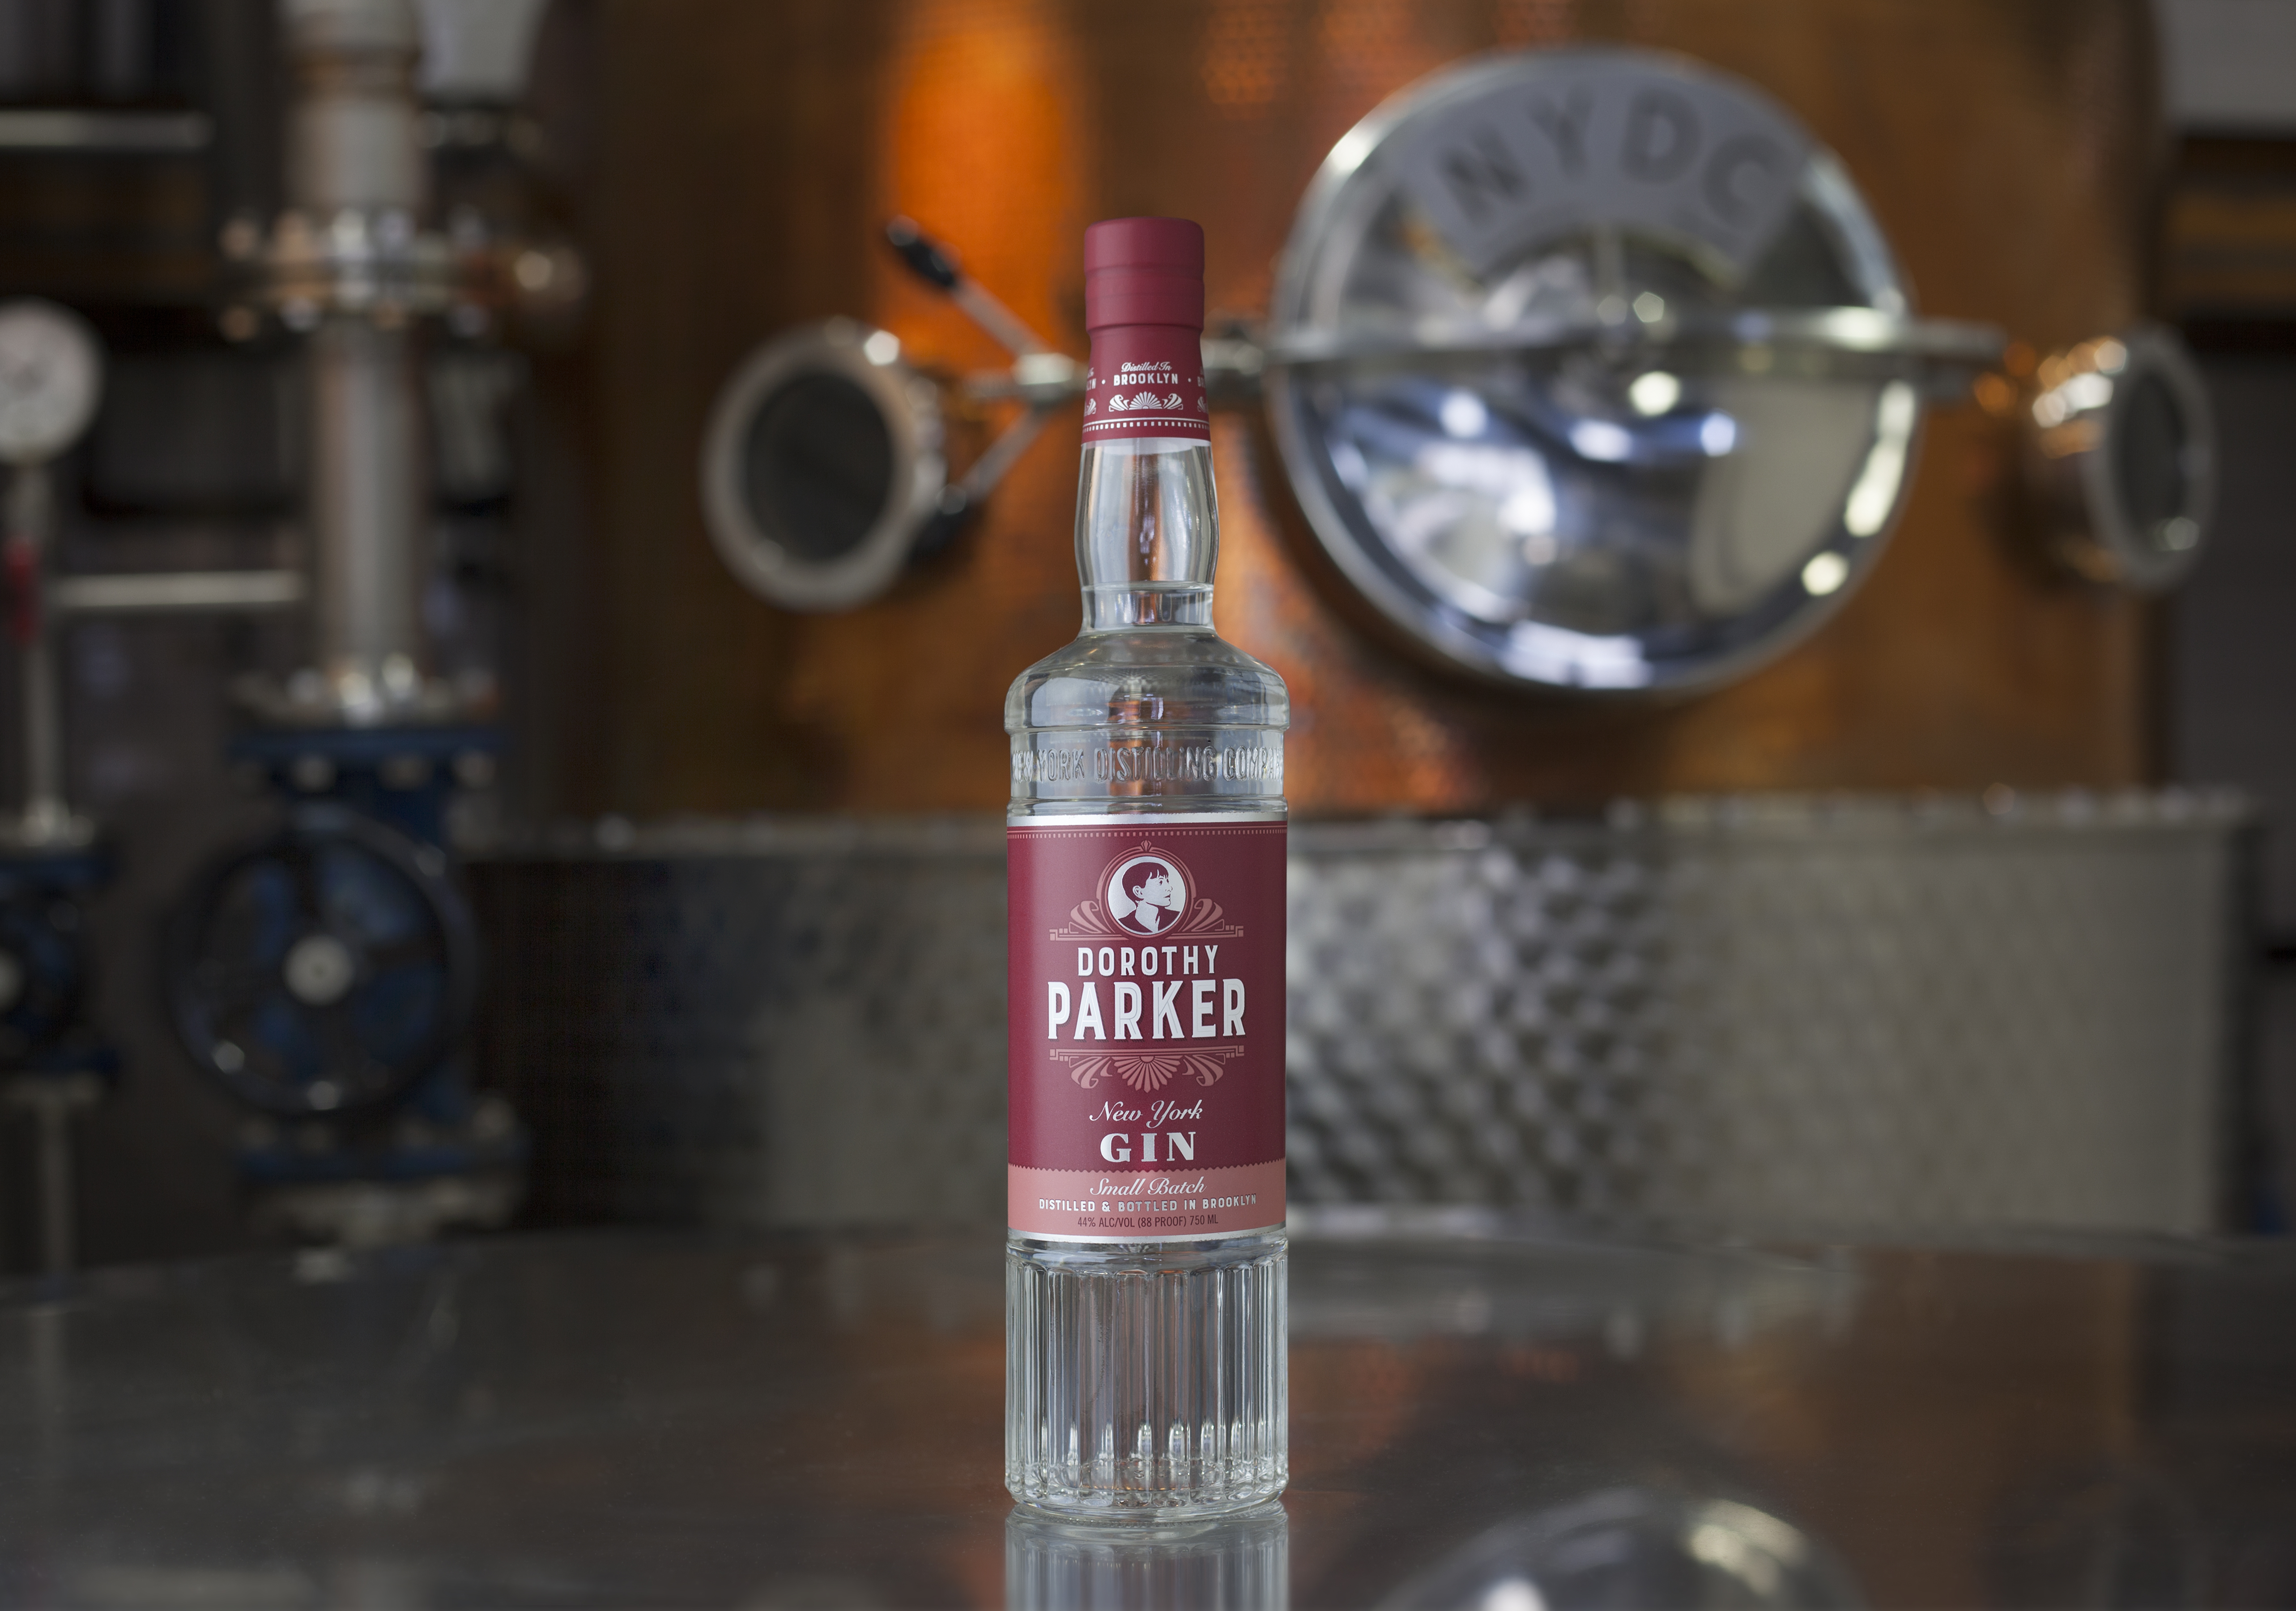 Dorothy Parker Gin from New York Distilling Company